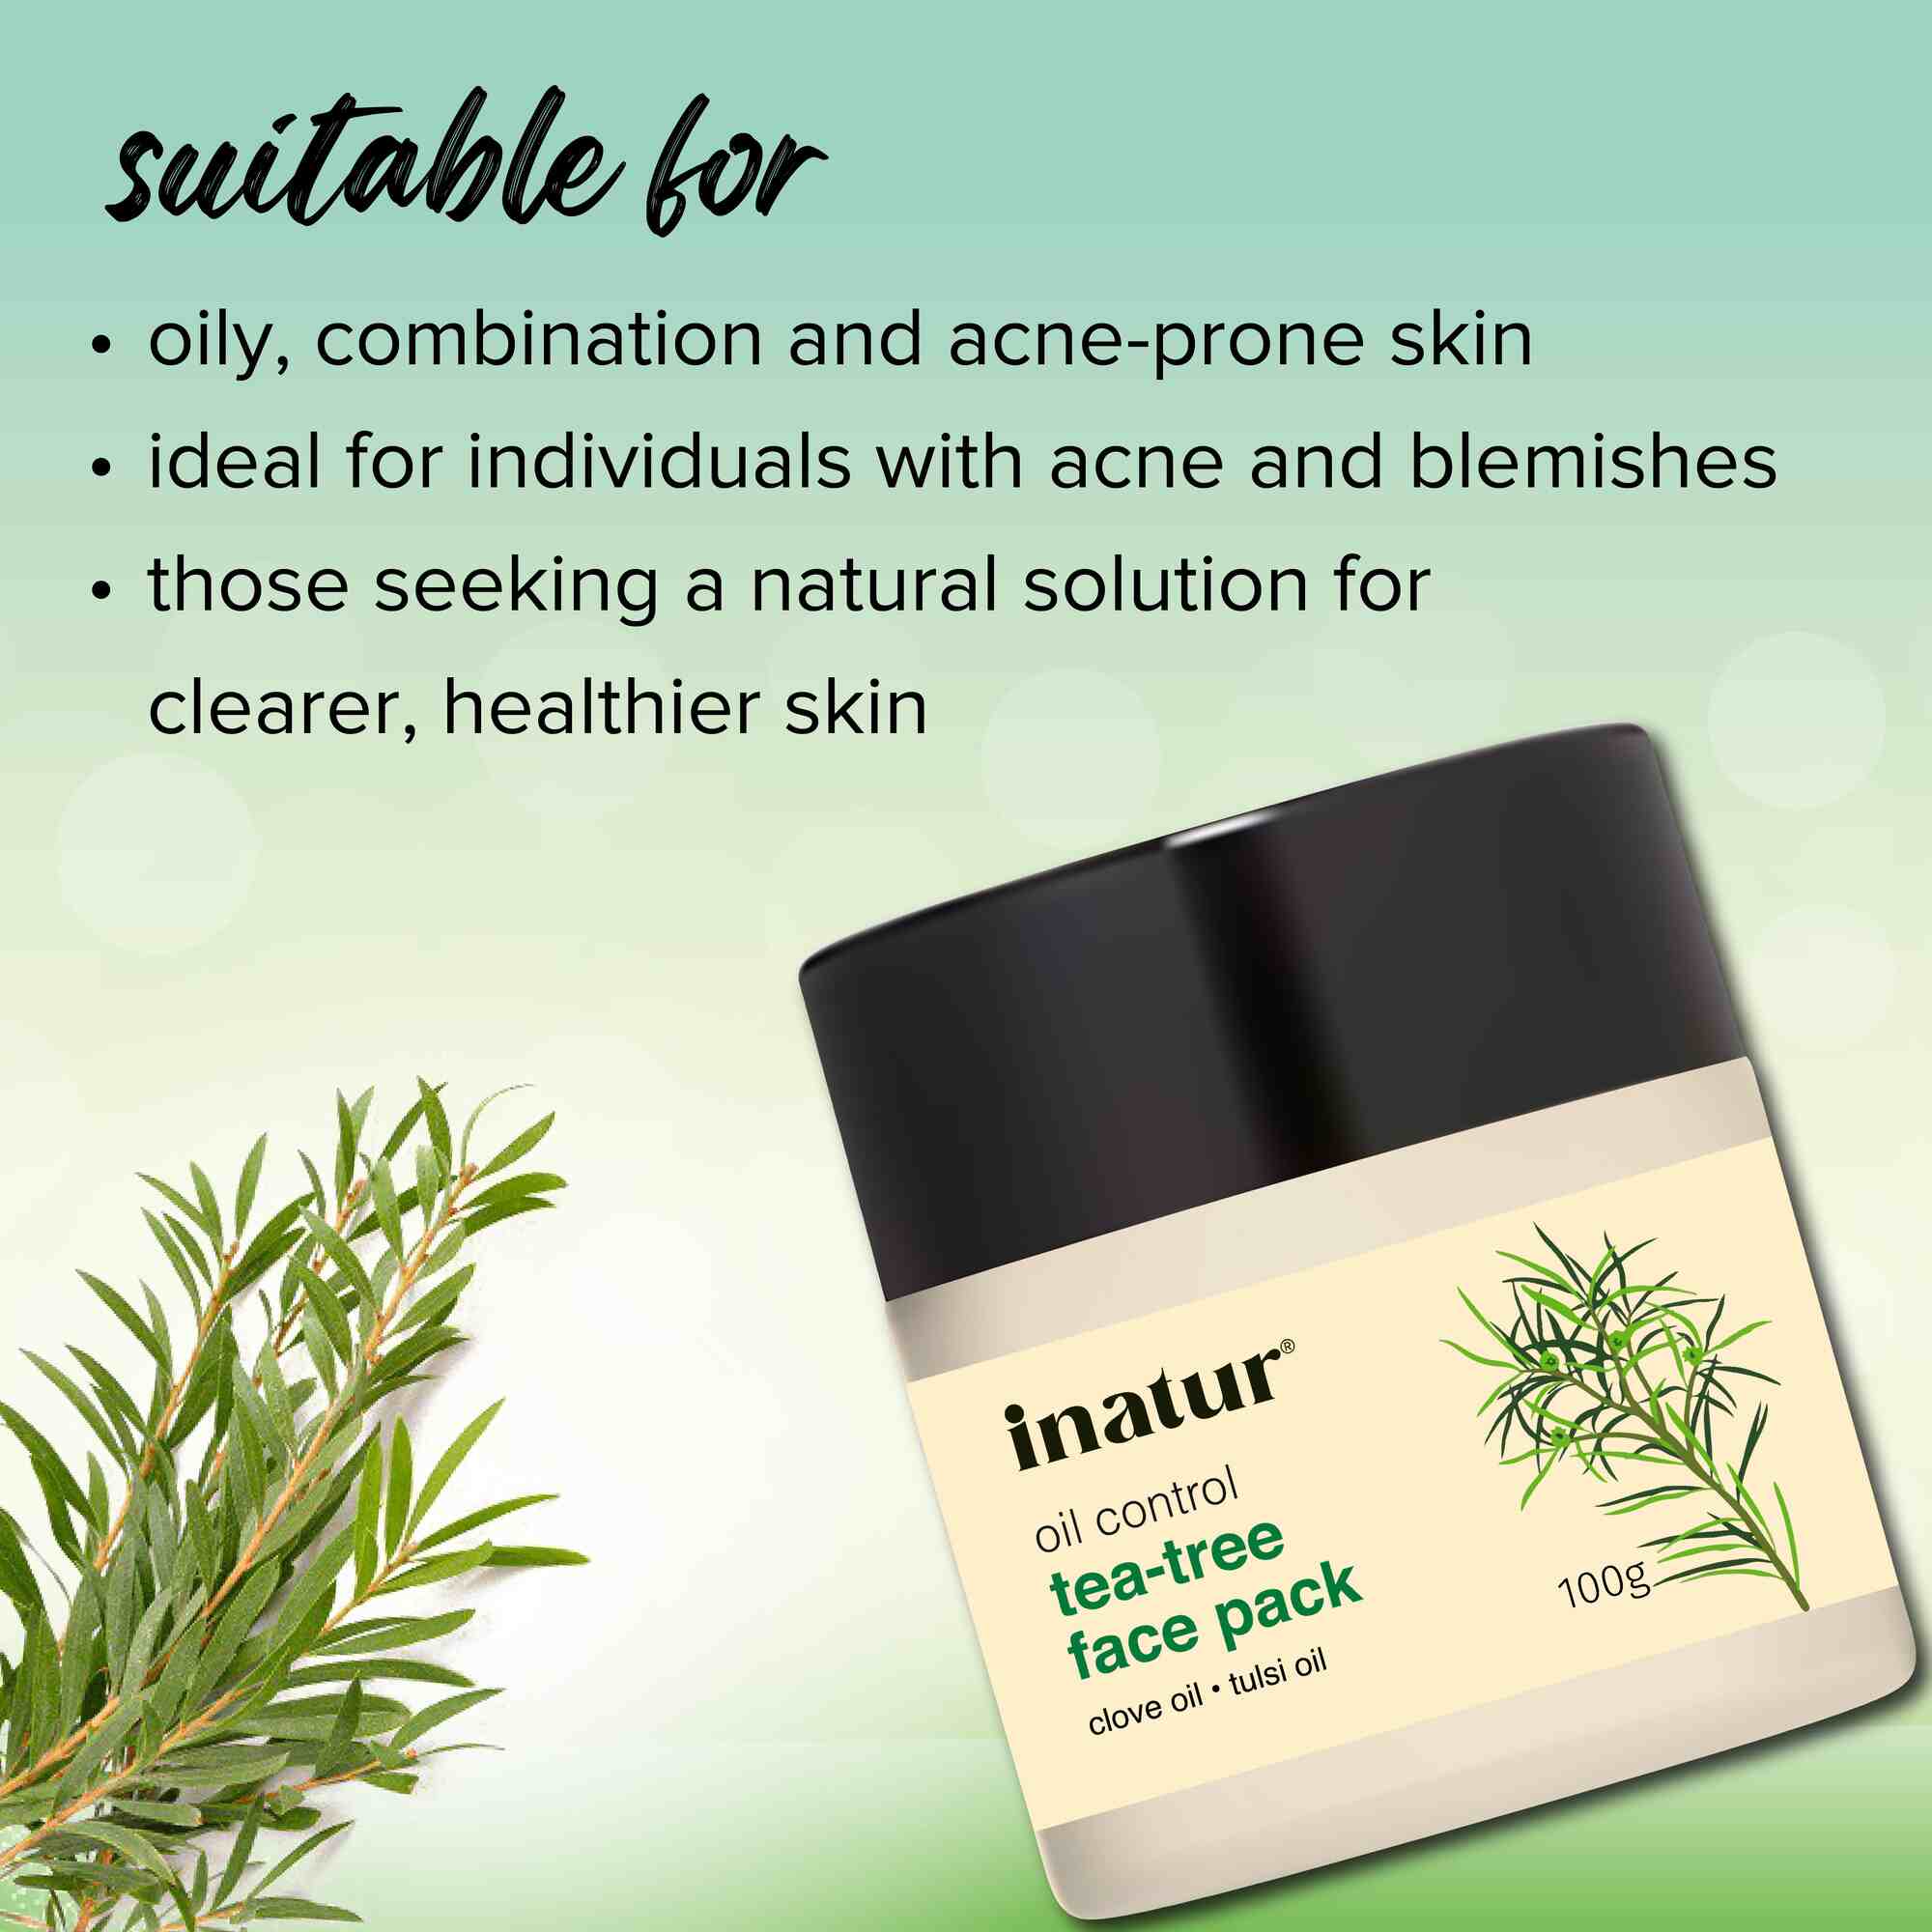 tea tree face pack is suitable for